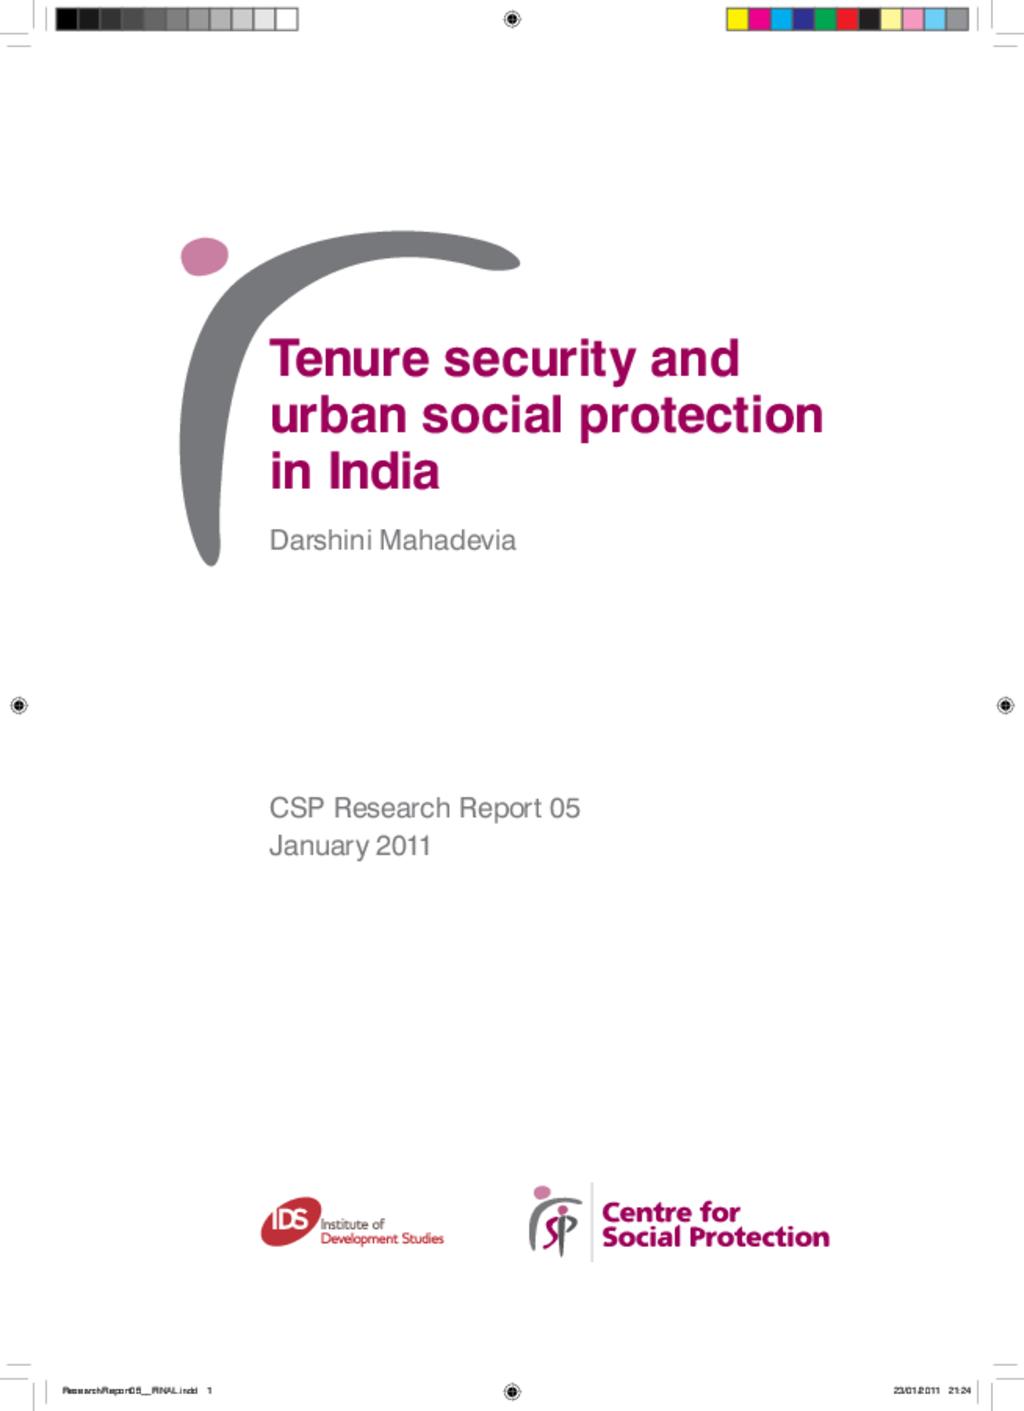 Tenure security and urban social protection in India